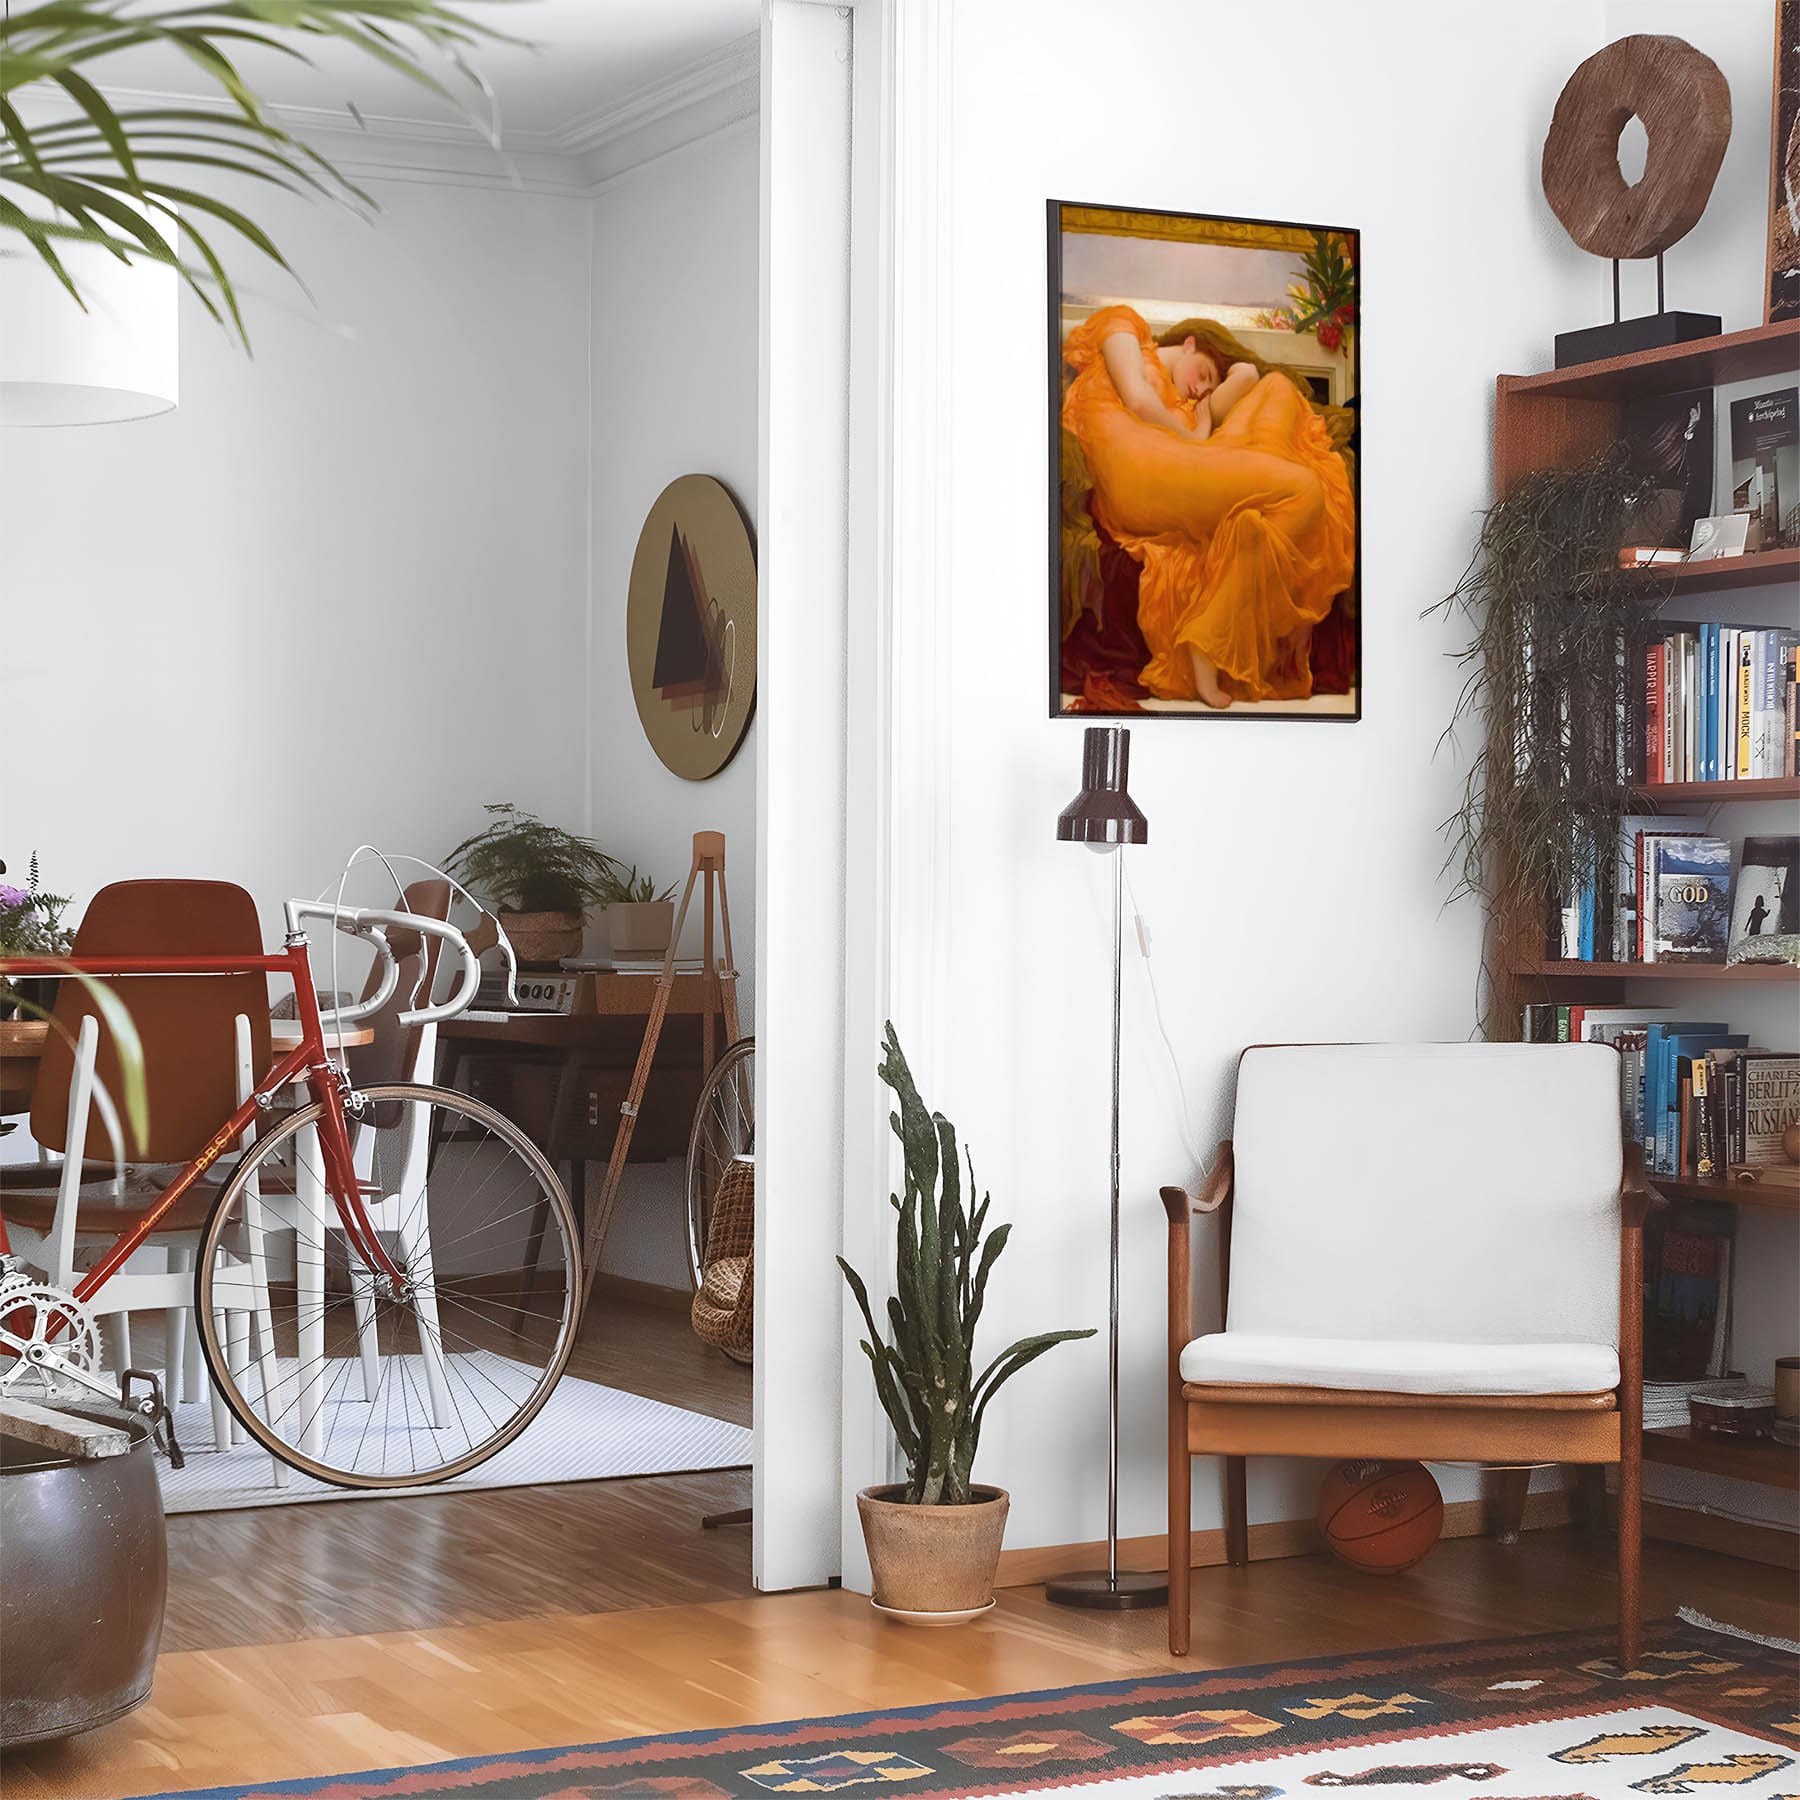 Eclectic living room with a road bike, bookshelf and house plants that features framed artwork of a Woman Sleeping in a Bright Orange Dress above a chair and lamp